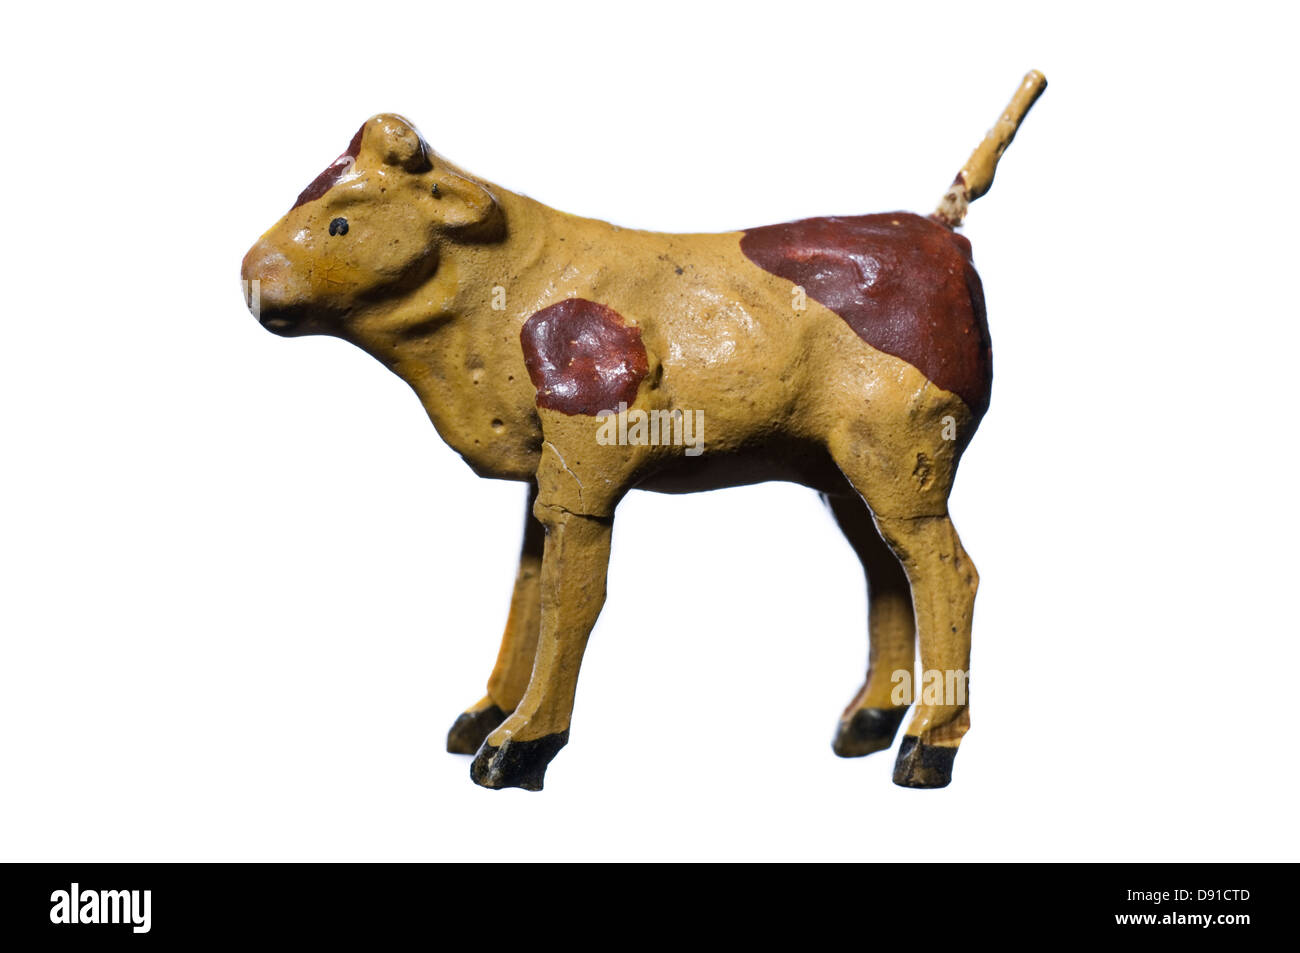 Figurine of cow against white background Stock Photo